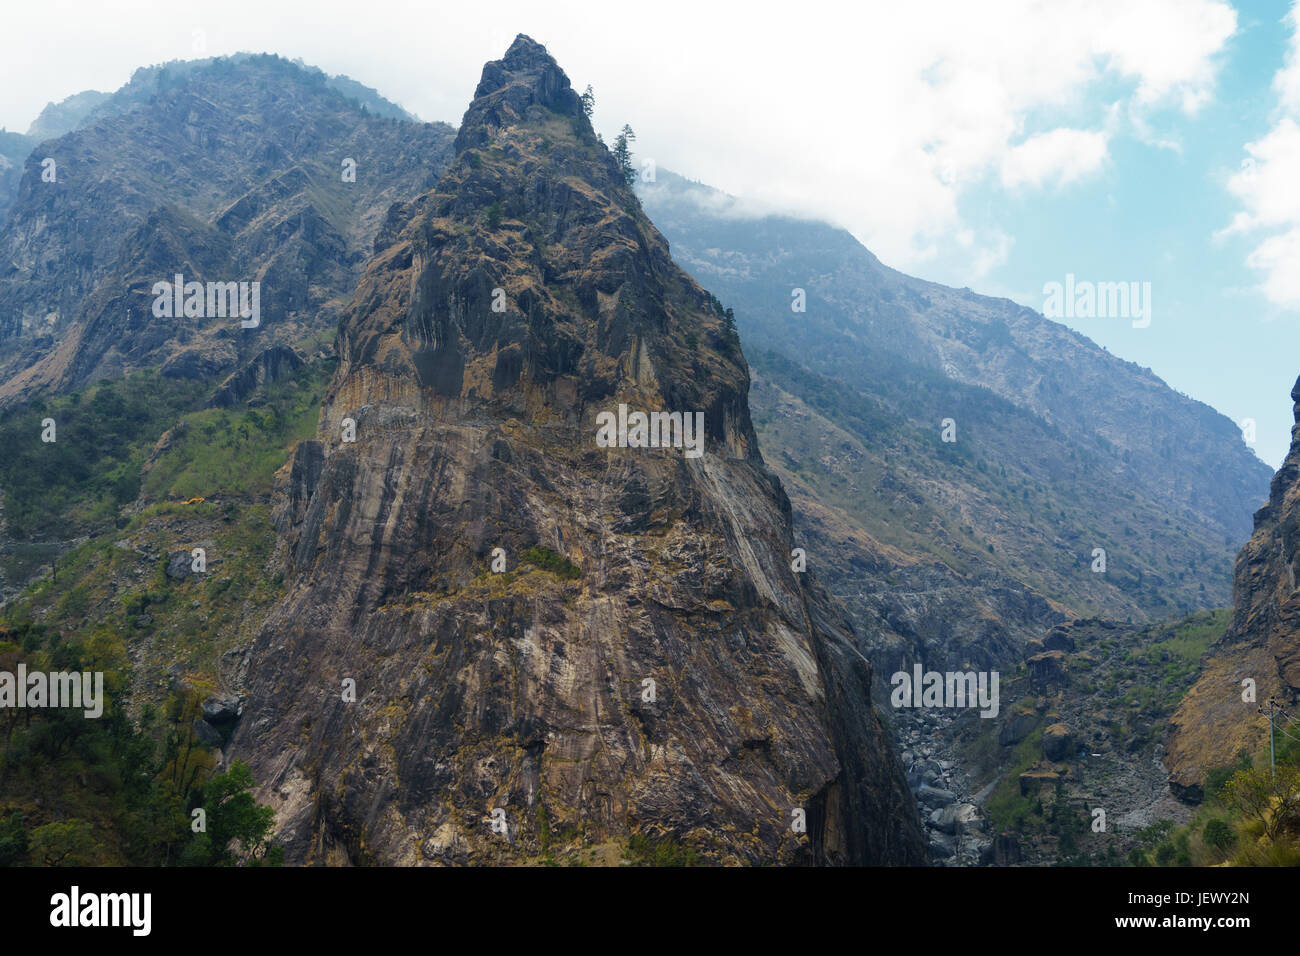 Rocky peak on the Annapurna Circuit between Chamje and Tal. A road carved in the rock face can be seen in the upper part of the peak. Stock Photo